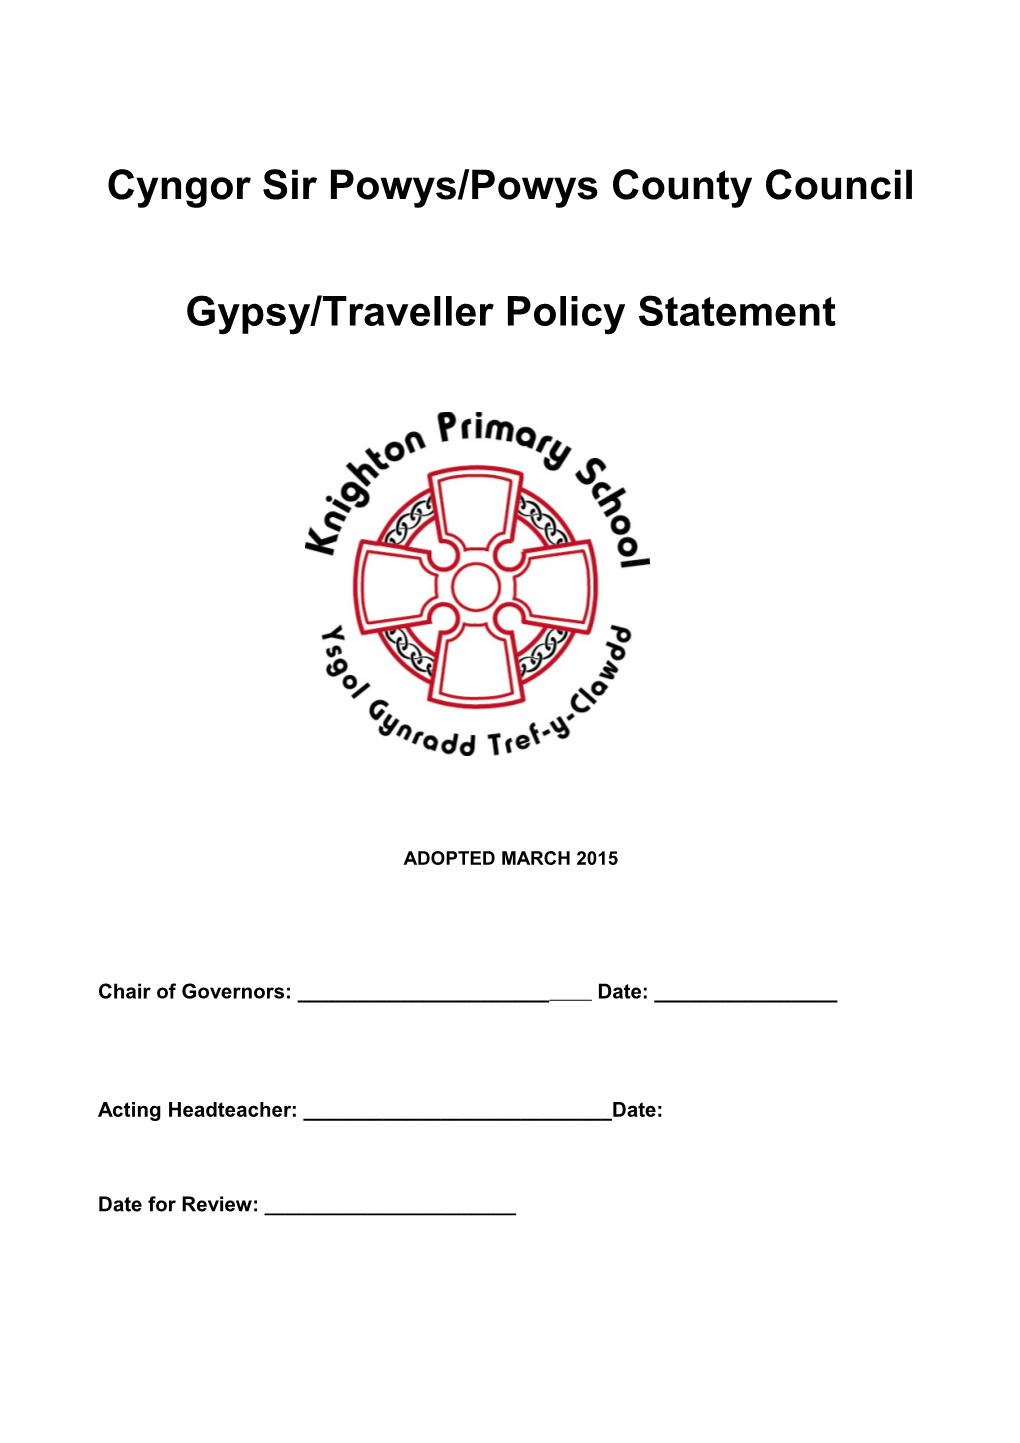 Gypsy/Traveller Policy Statement